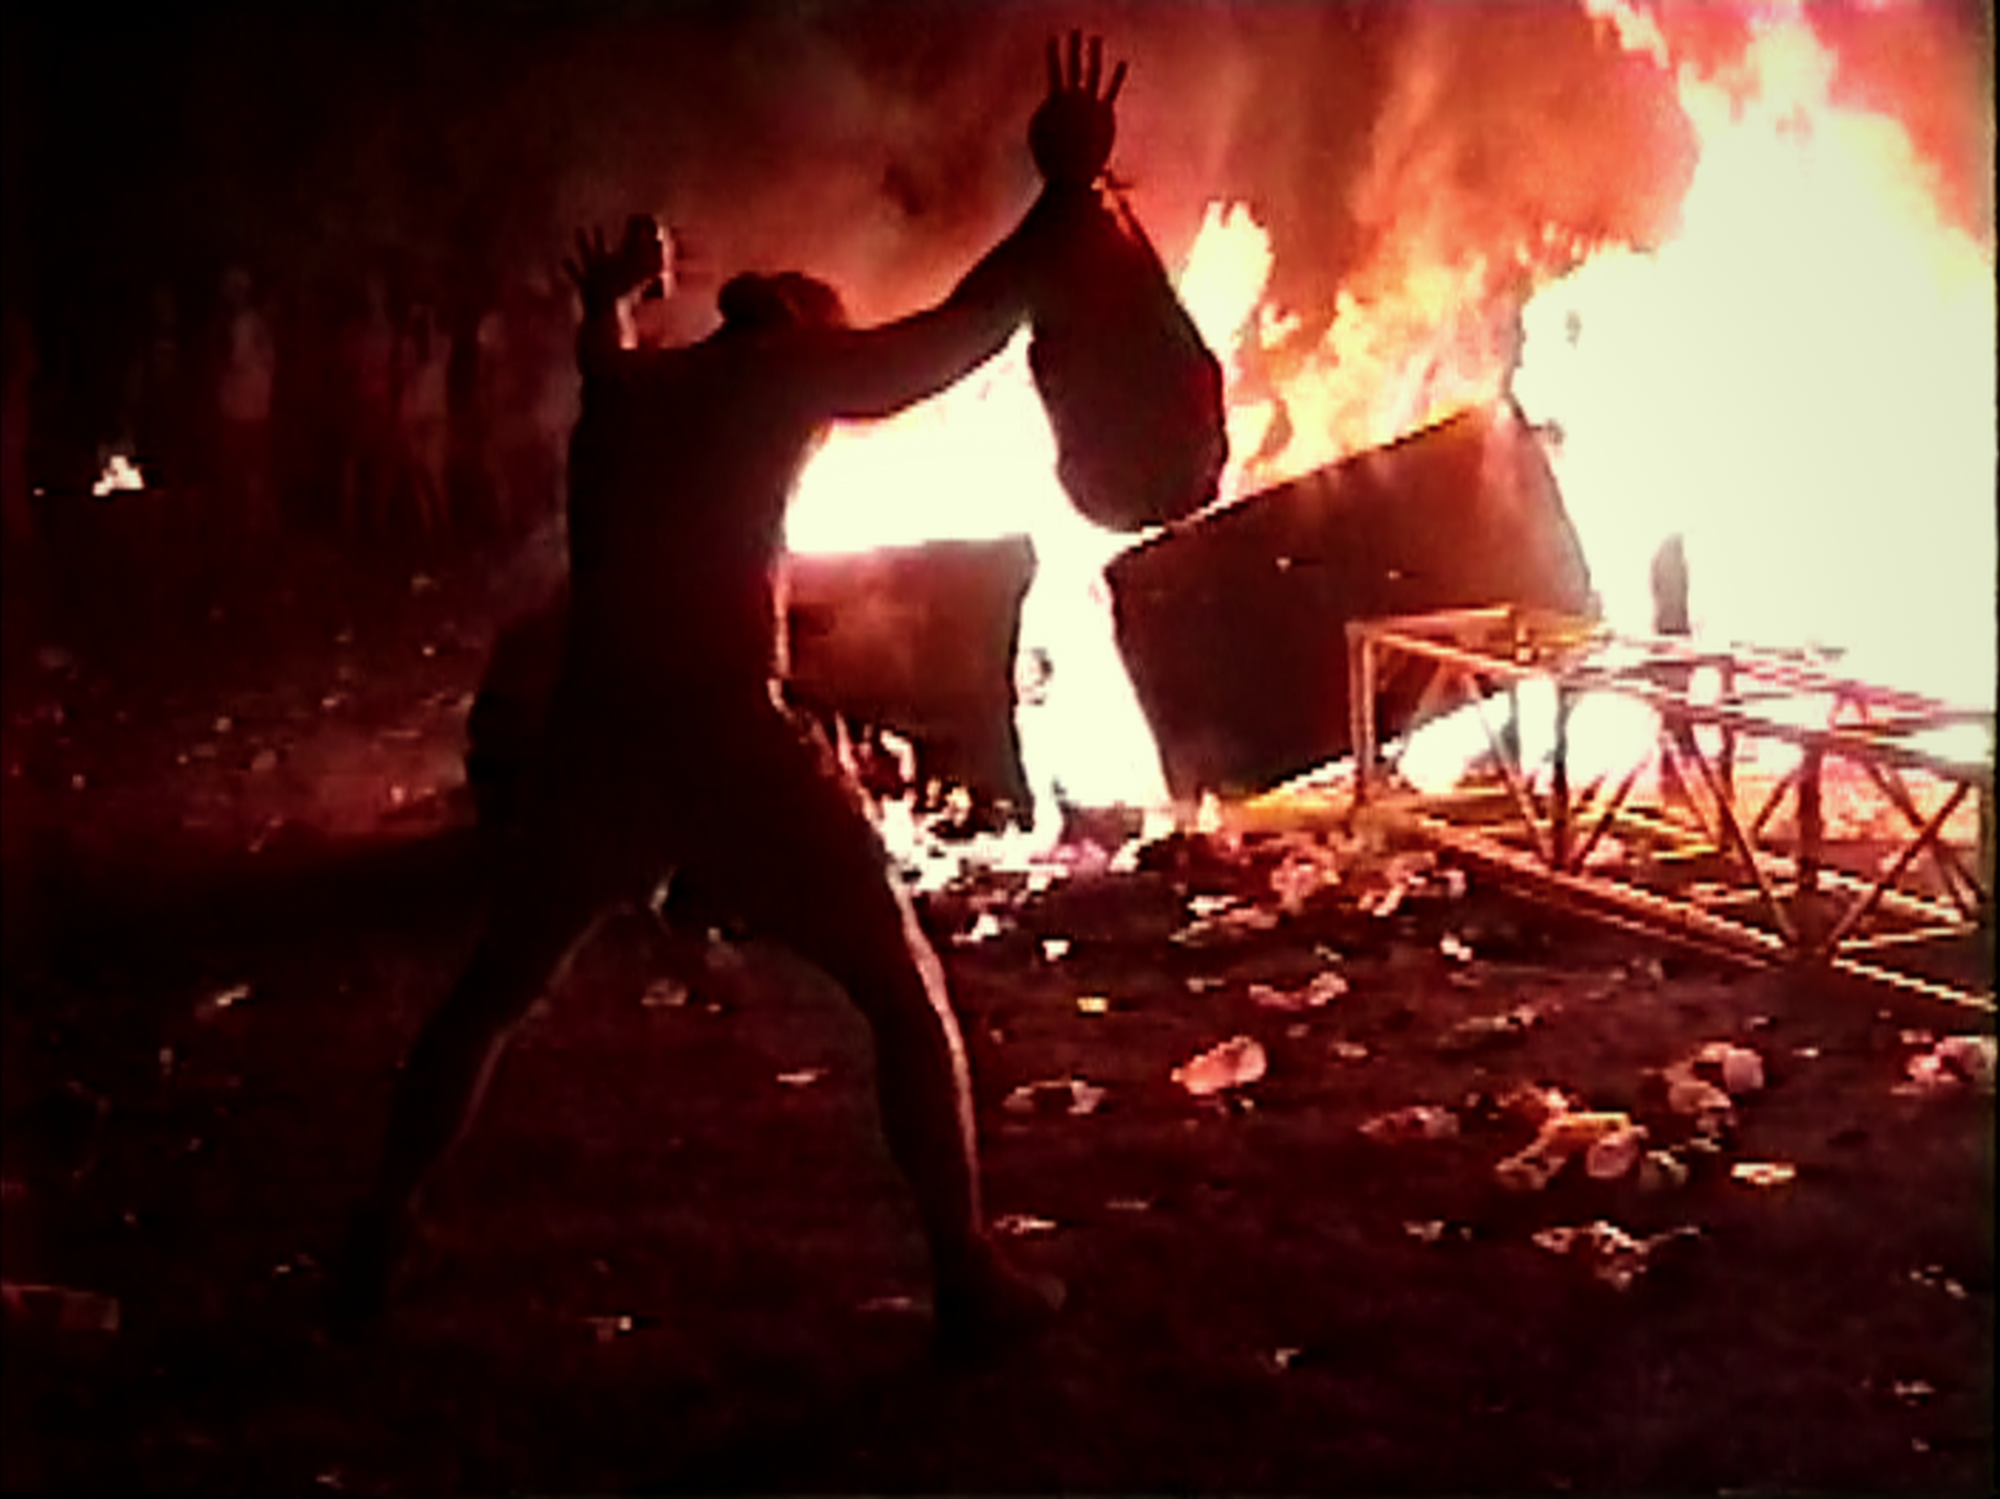 Production still of 'Trainwreck: Woodstock '99' with a person standing in front of a giant fire.